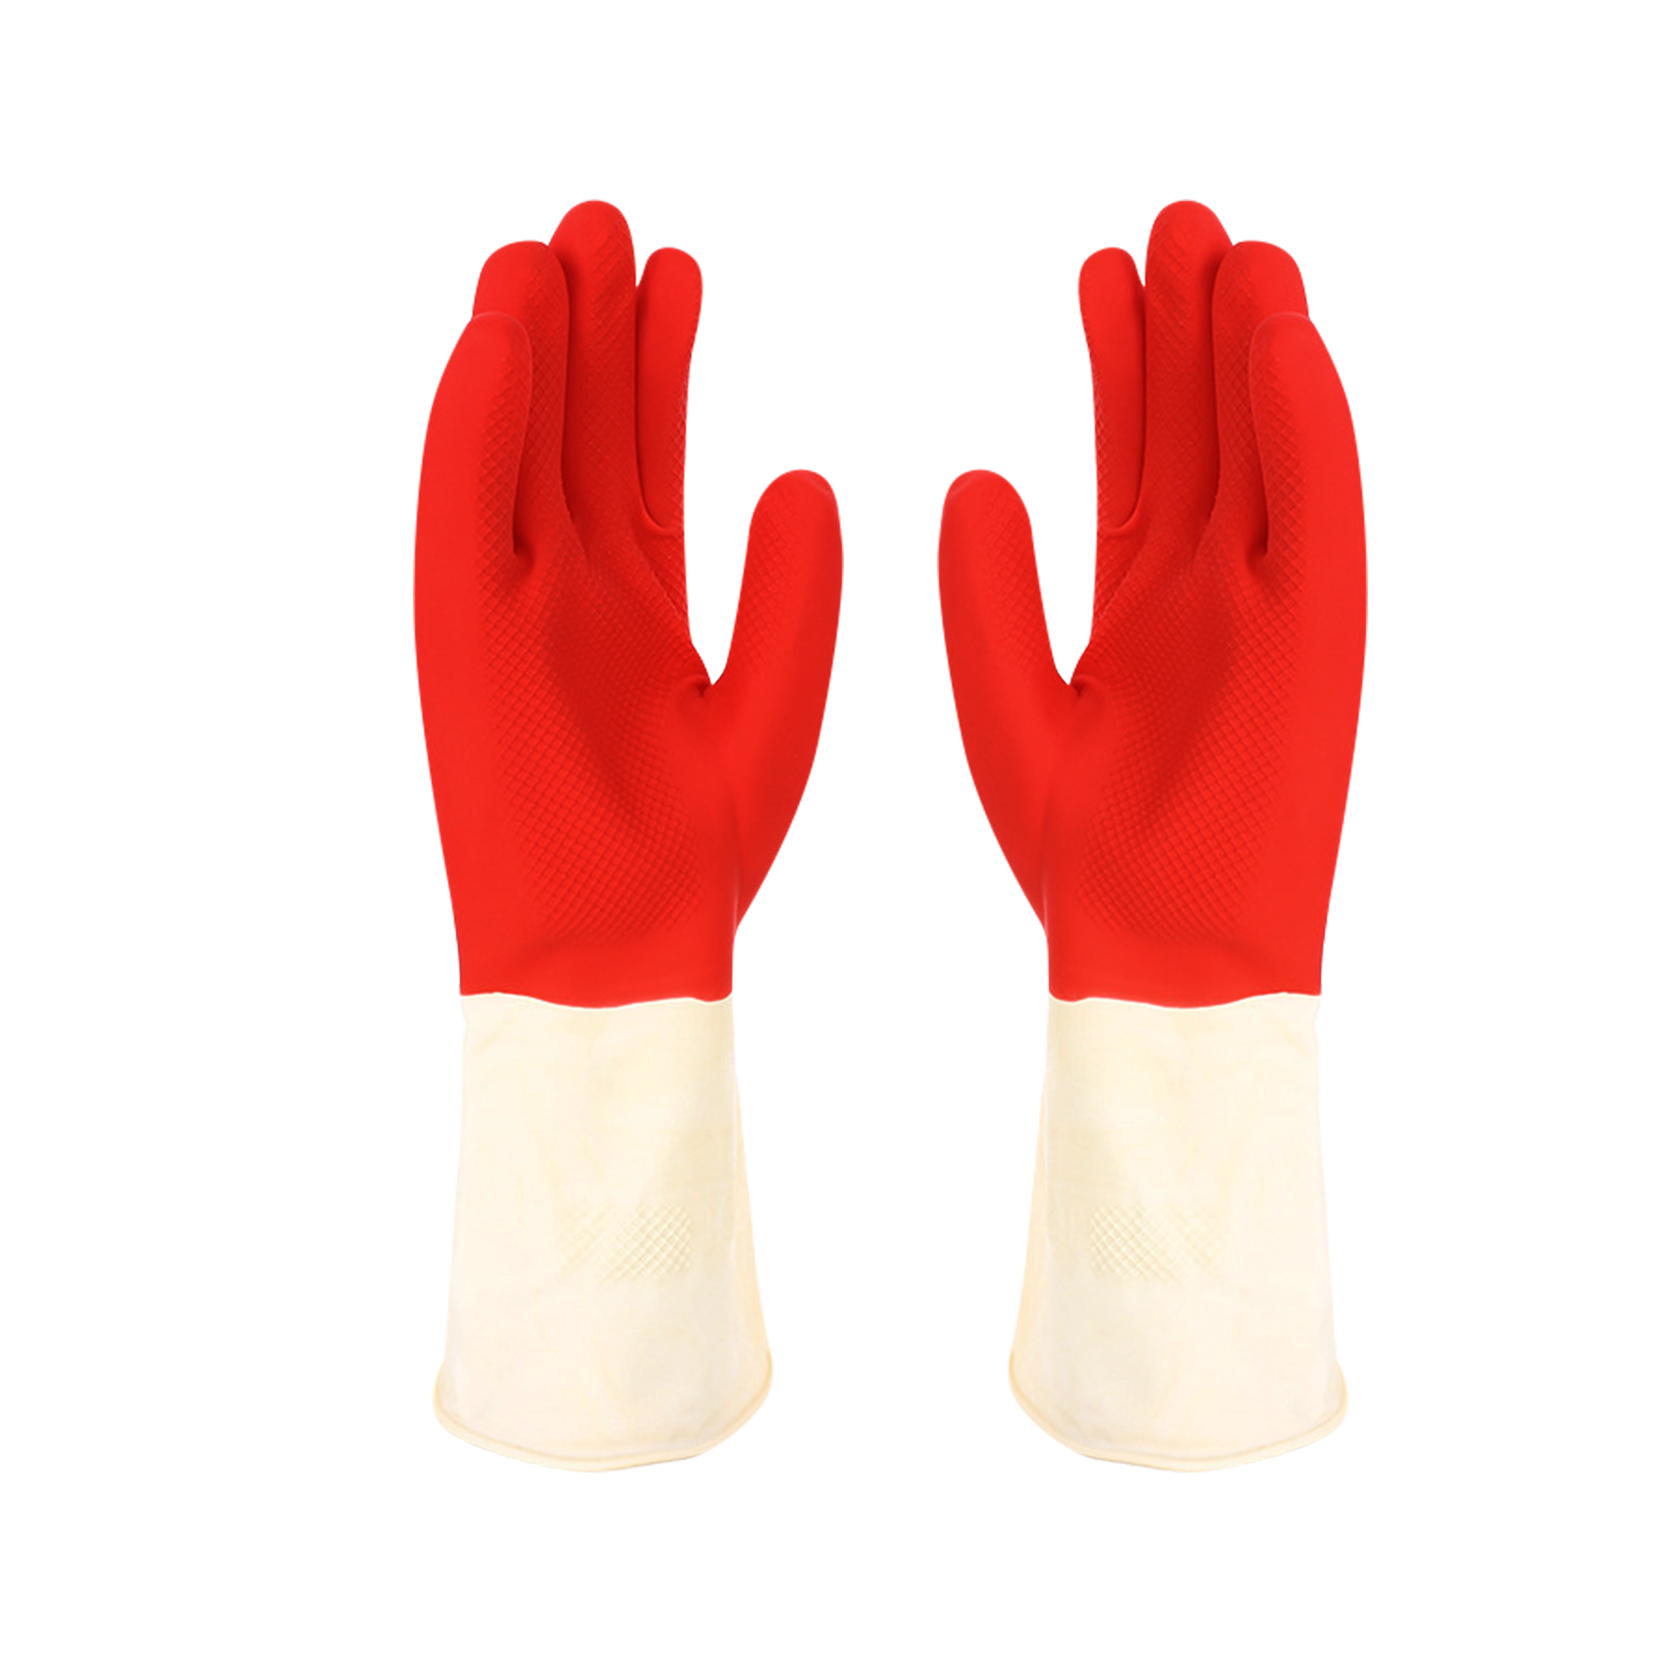 Red and white double color industrial latex gloves working